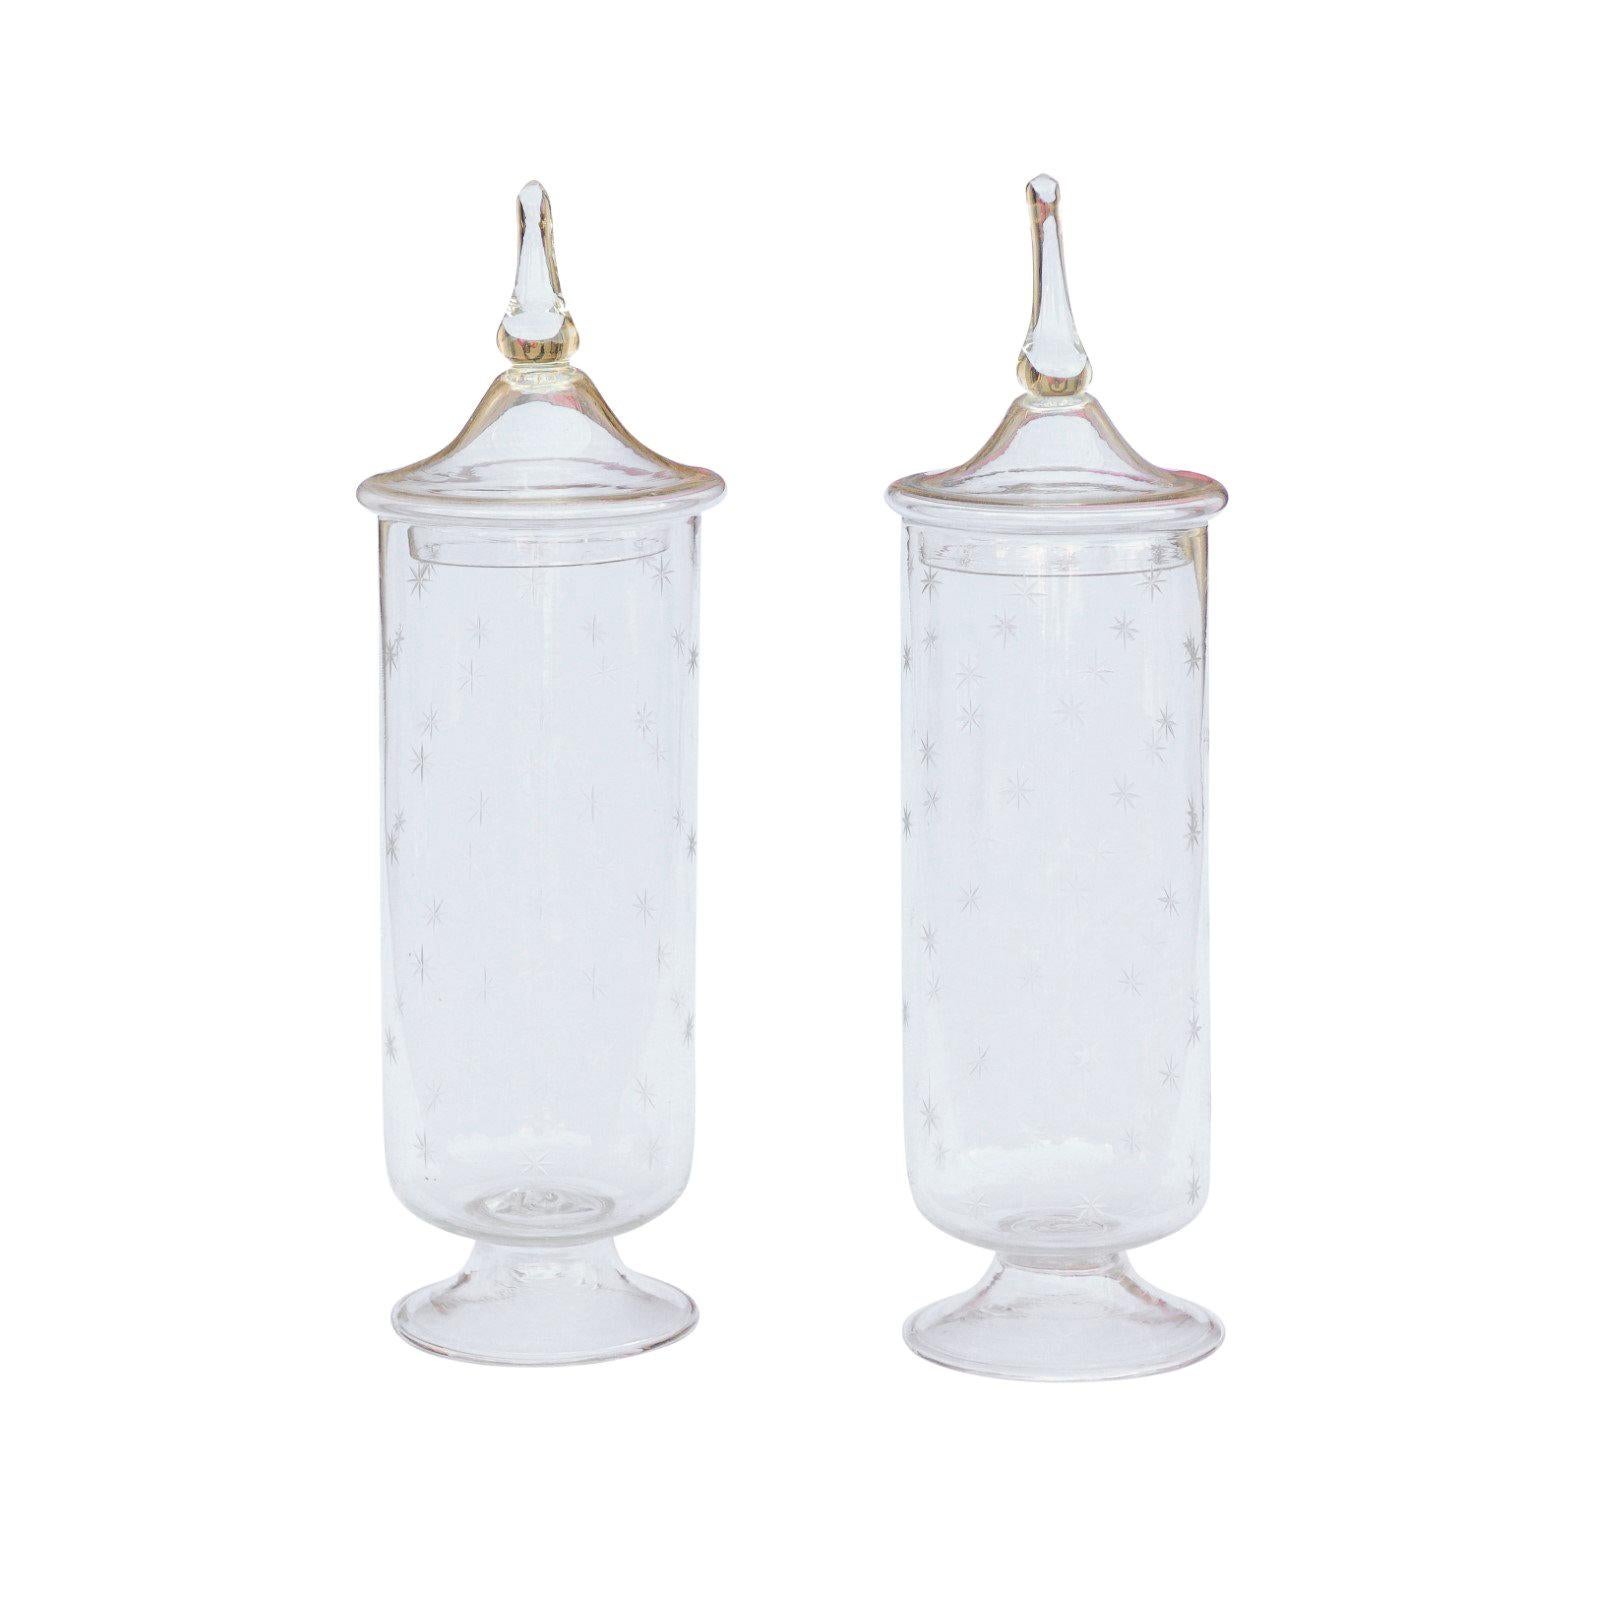 Pair of English 1900s Edwardian Period Tall Lidded Jars with Petite Star Motifs For Sale